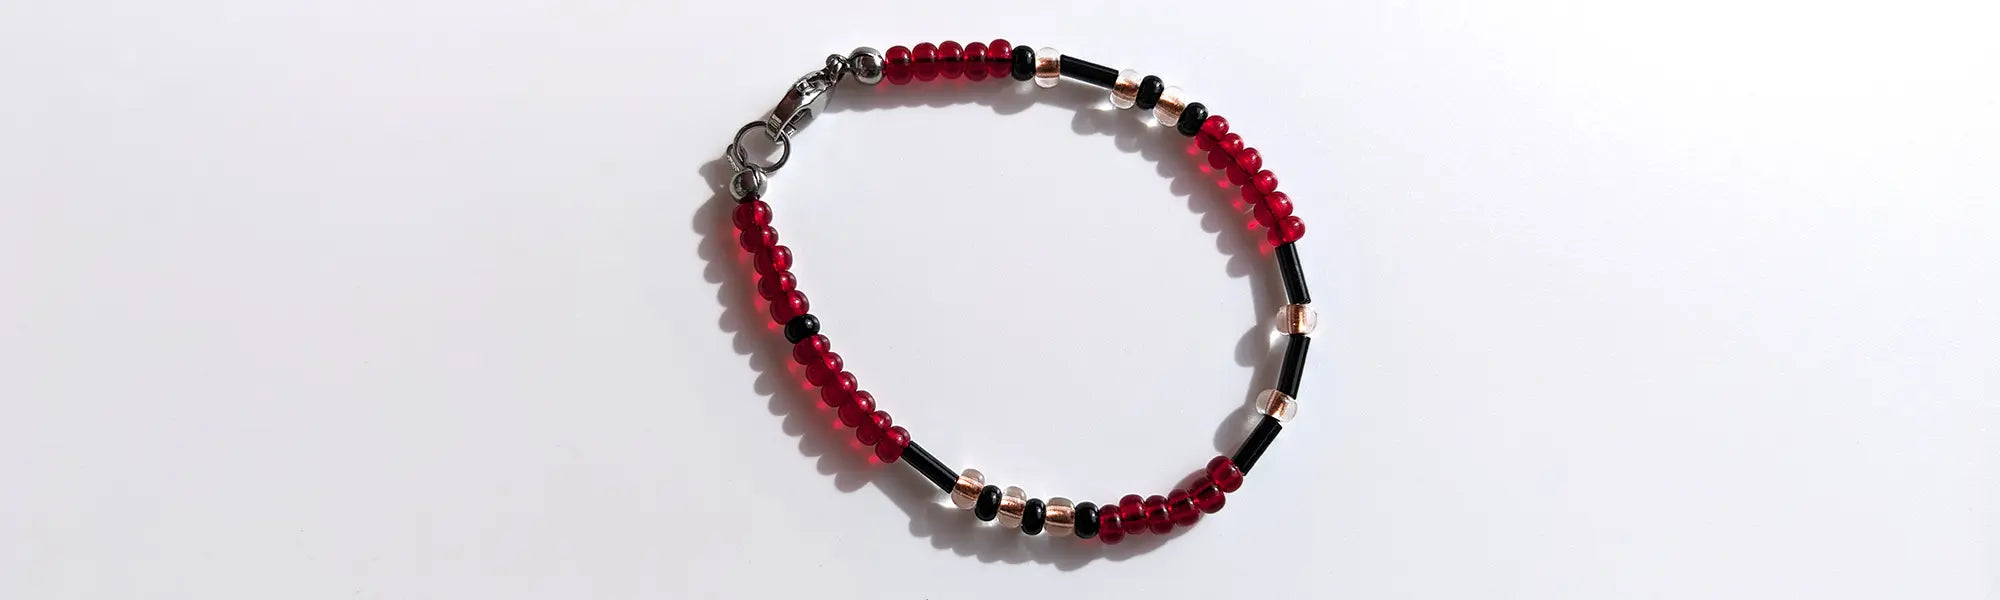 Elegant Cherry Sparkle Morse code bracelet, handcrafted with bold, passionate red & clear gold Czech glass beads, holds the secret message “Love.”